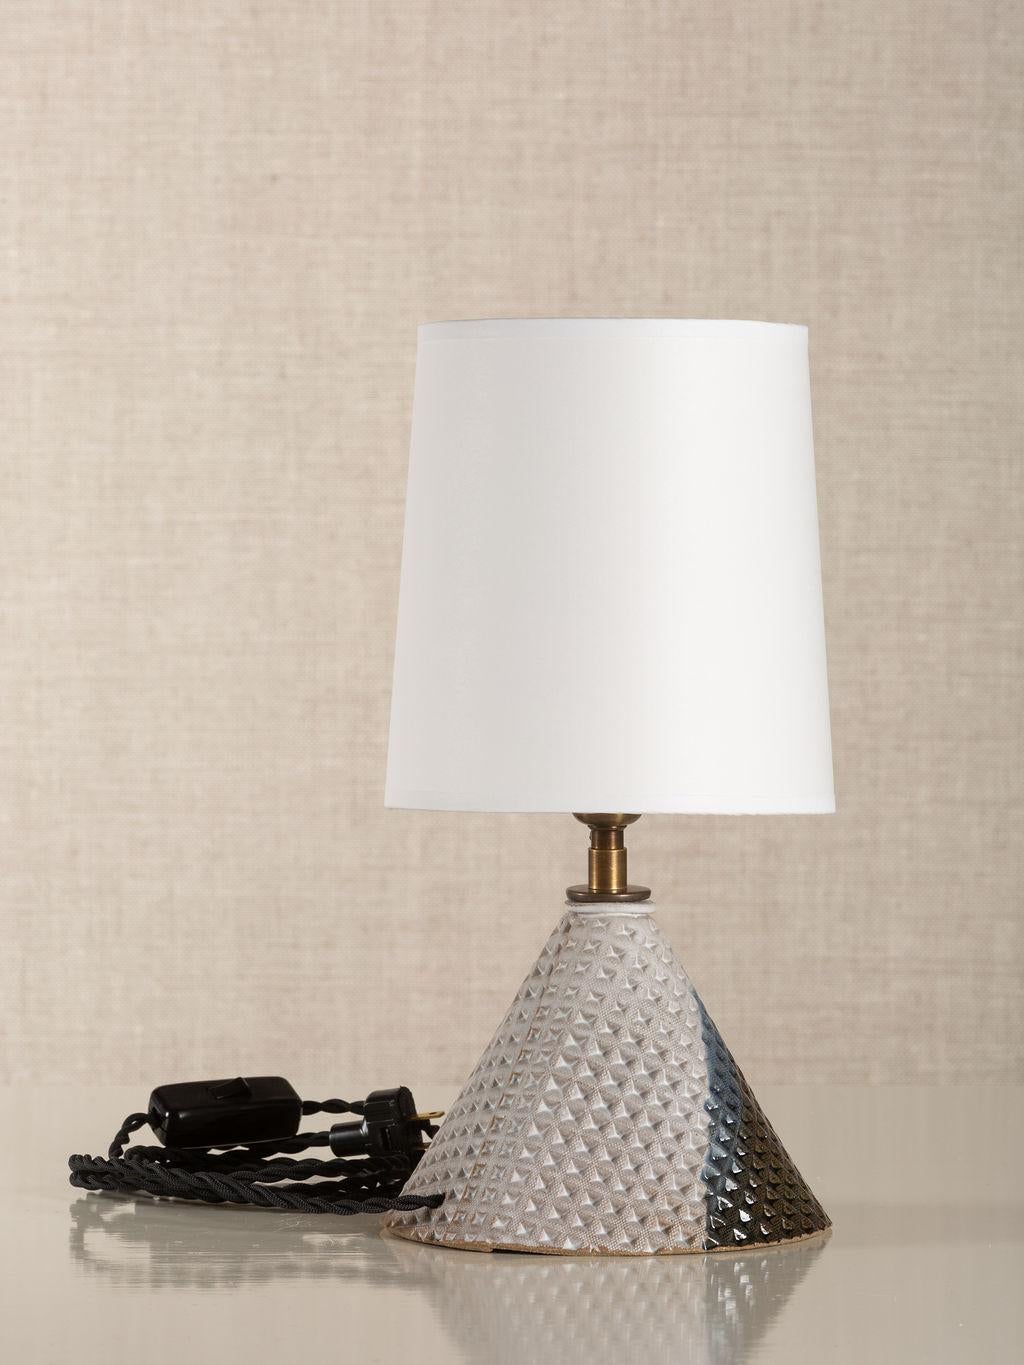 Description:

Handmade stoneware slab construction. Lamps are individually crafted and one of a kind.

Finish:

Parchment & bottle green glaze. Antique brass fittings with braided black cloth cord. Available with off-white paper or linen clip